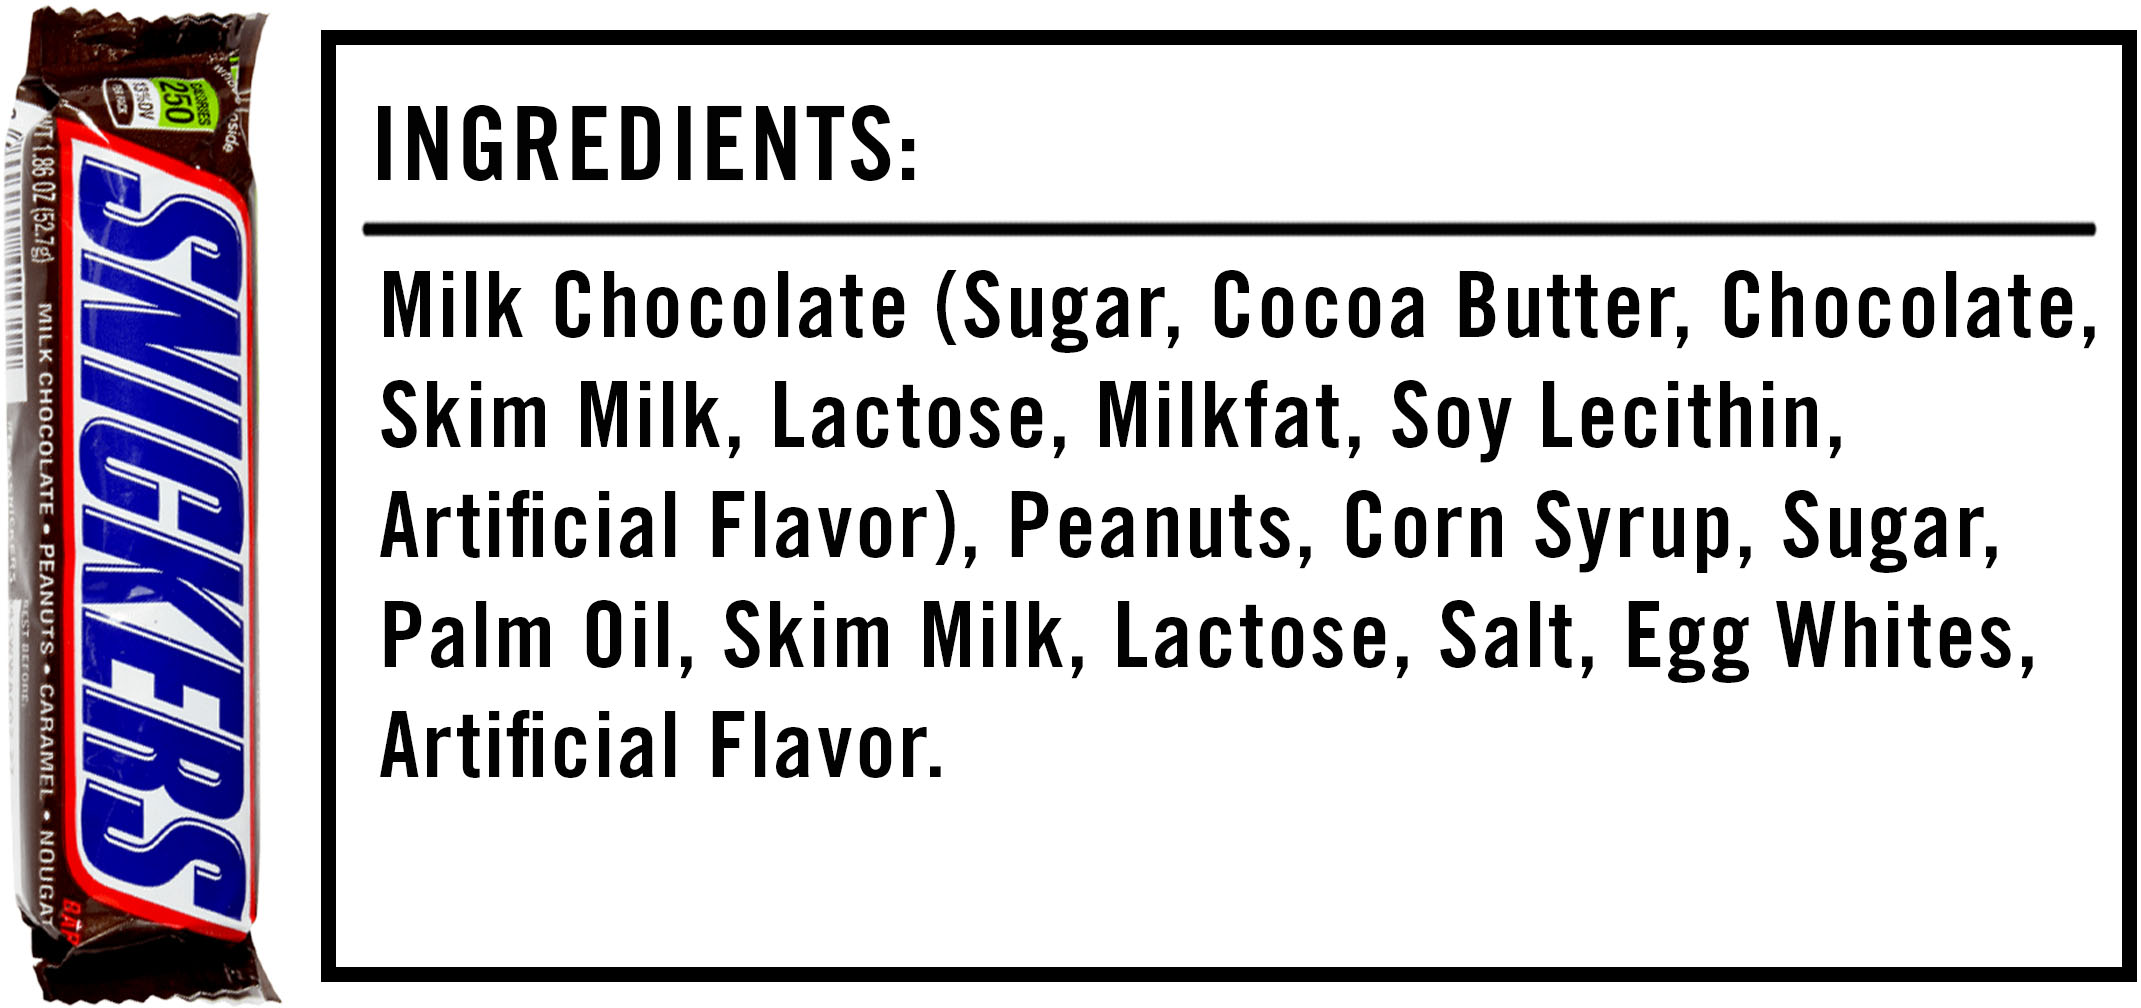 Examining the Ingredients of Snickers Candy Bar